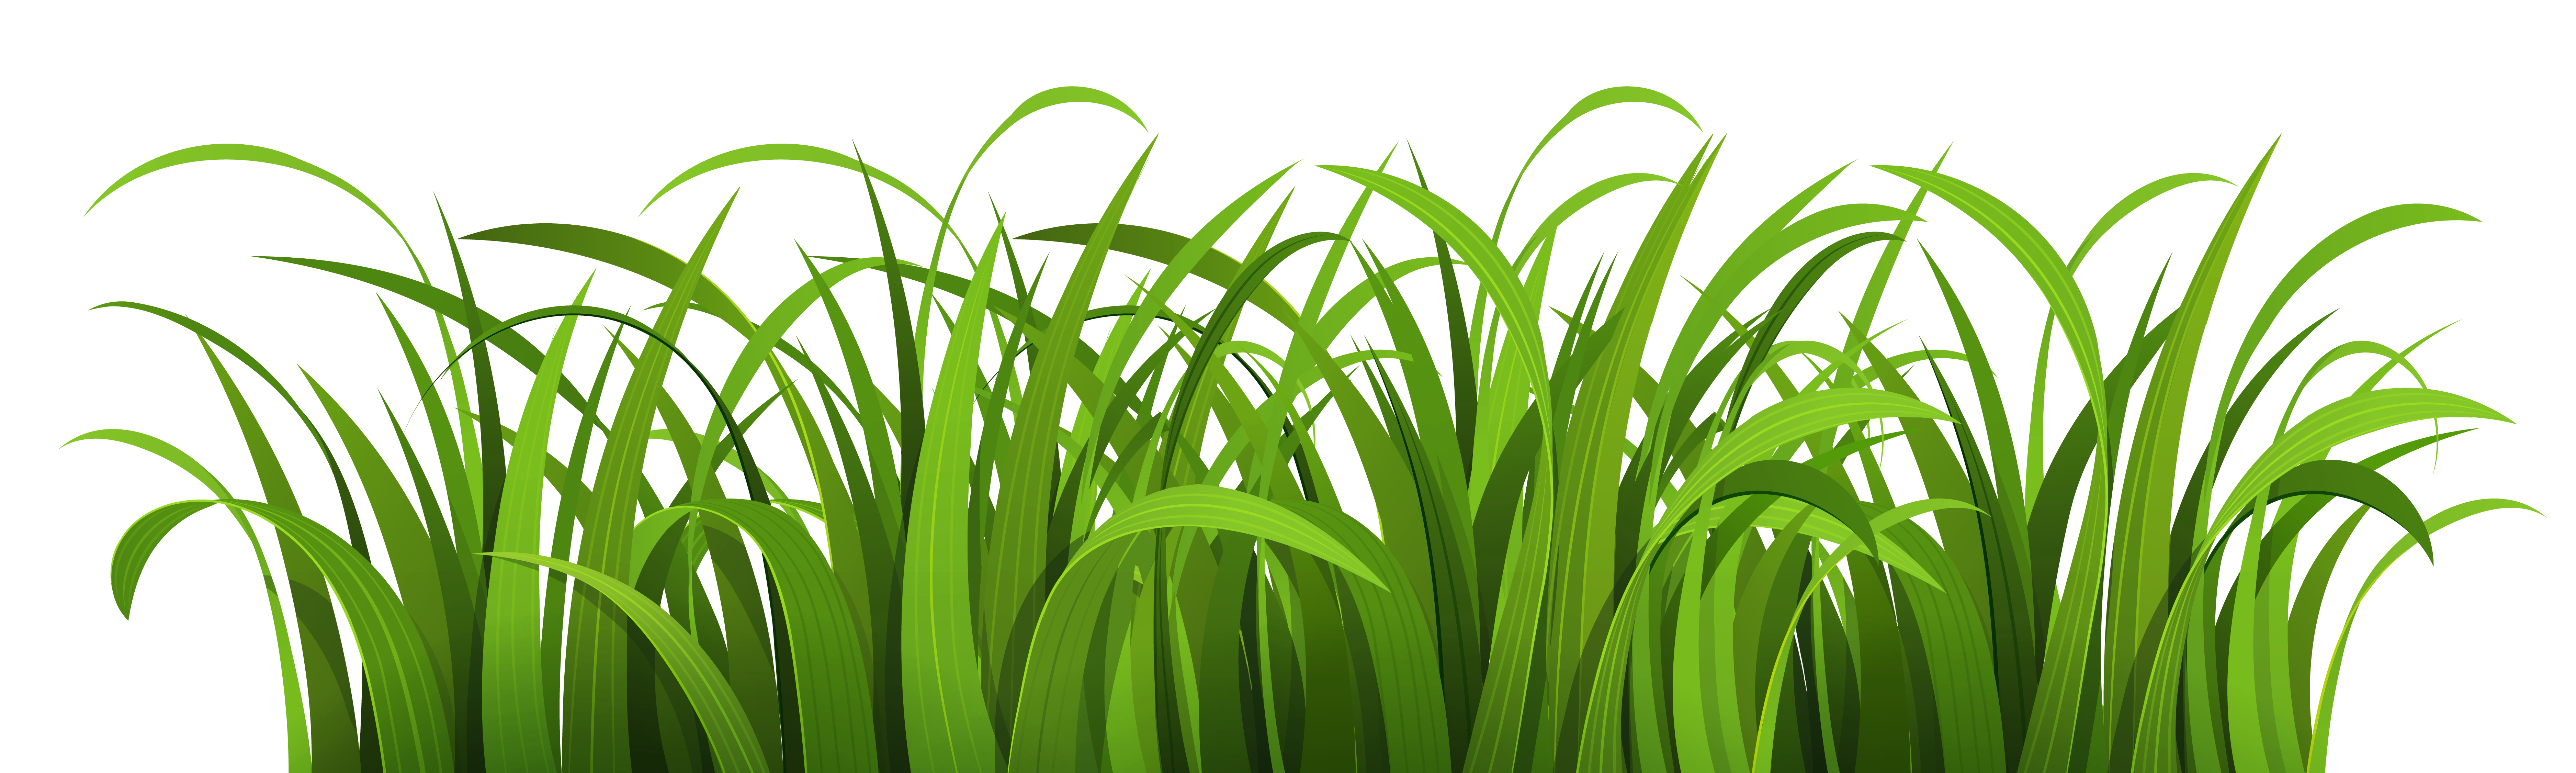 Download Grass clipart vector, Grass vector Transparent FREE for ...